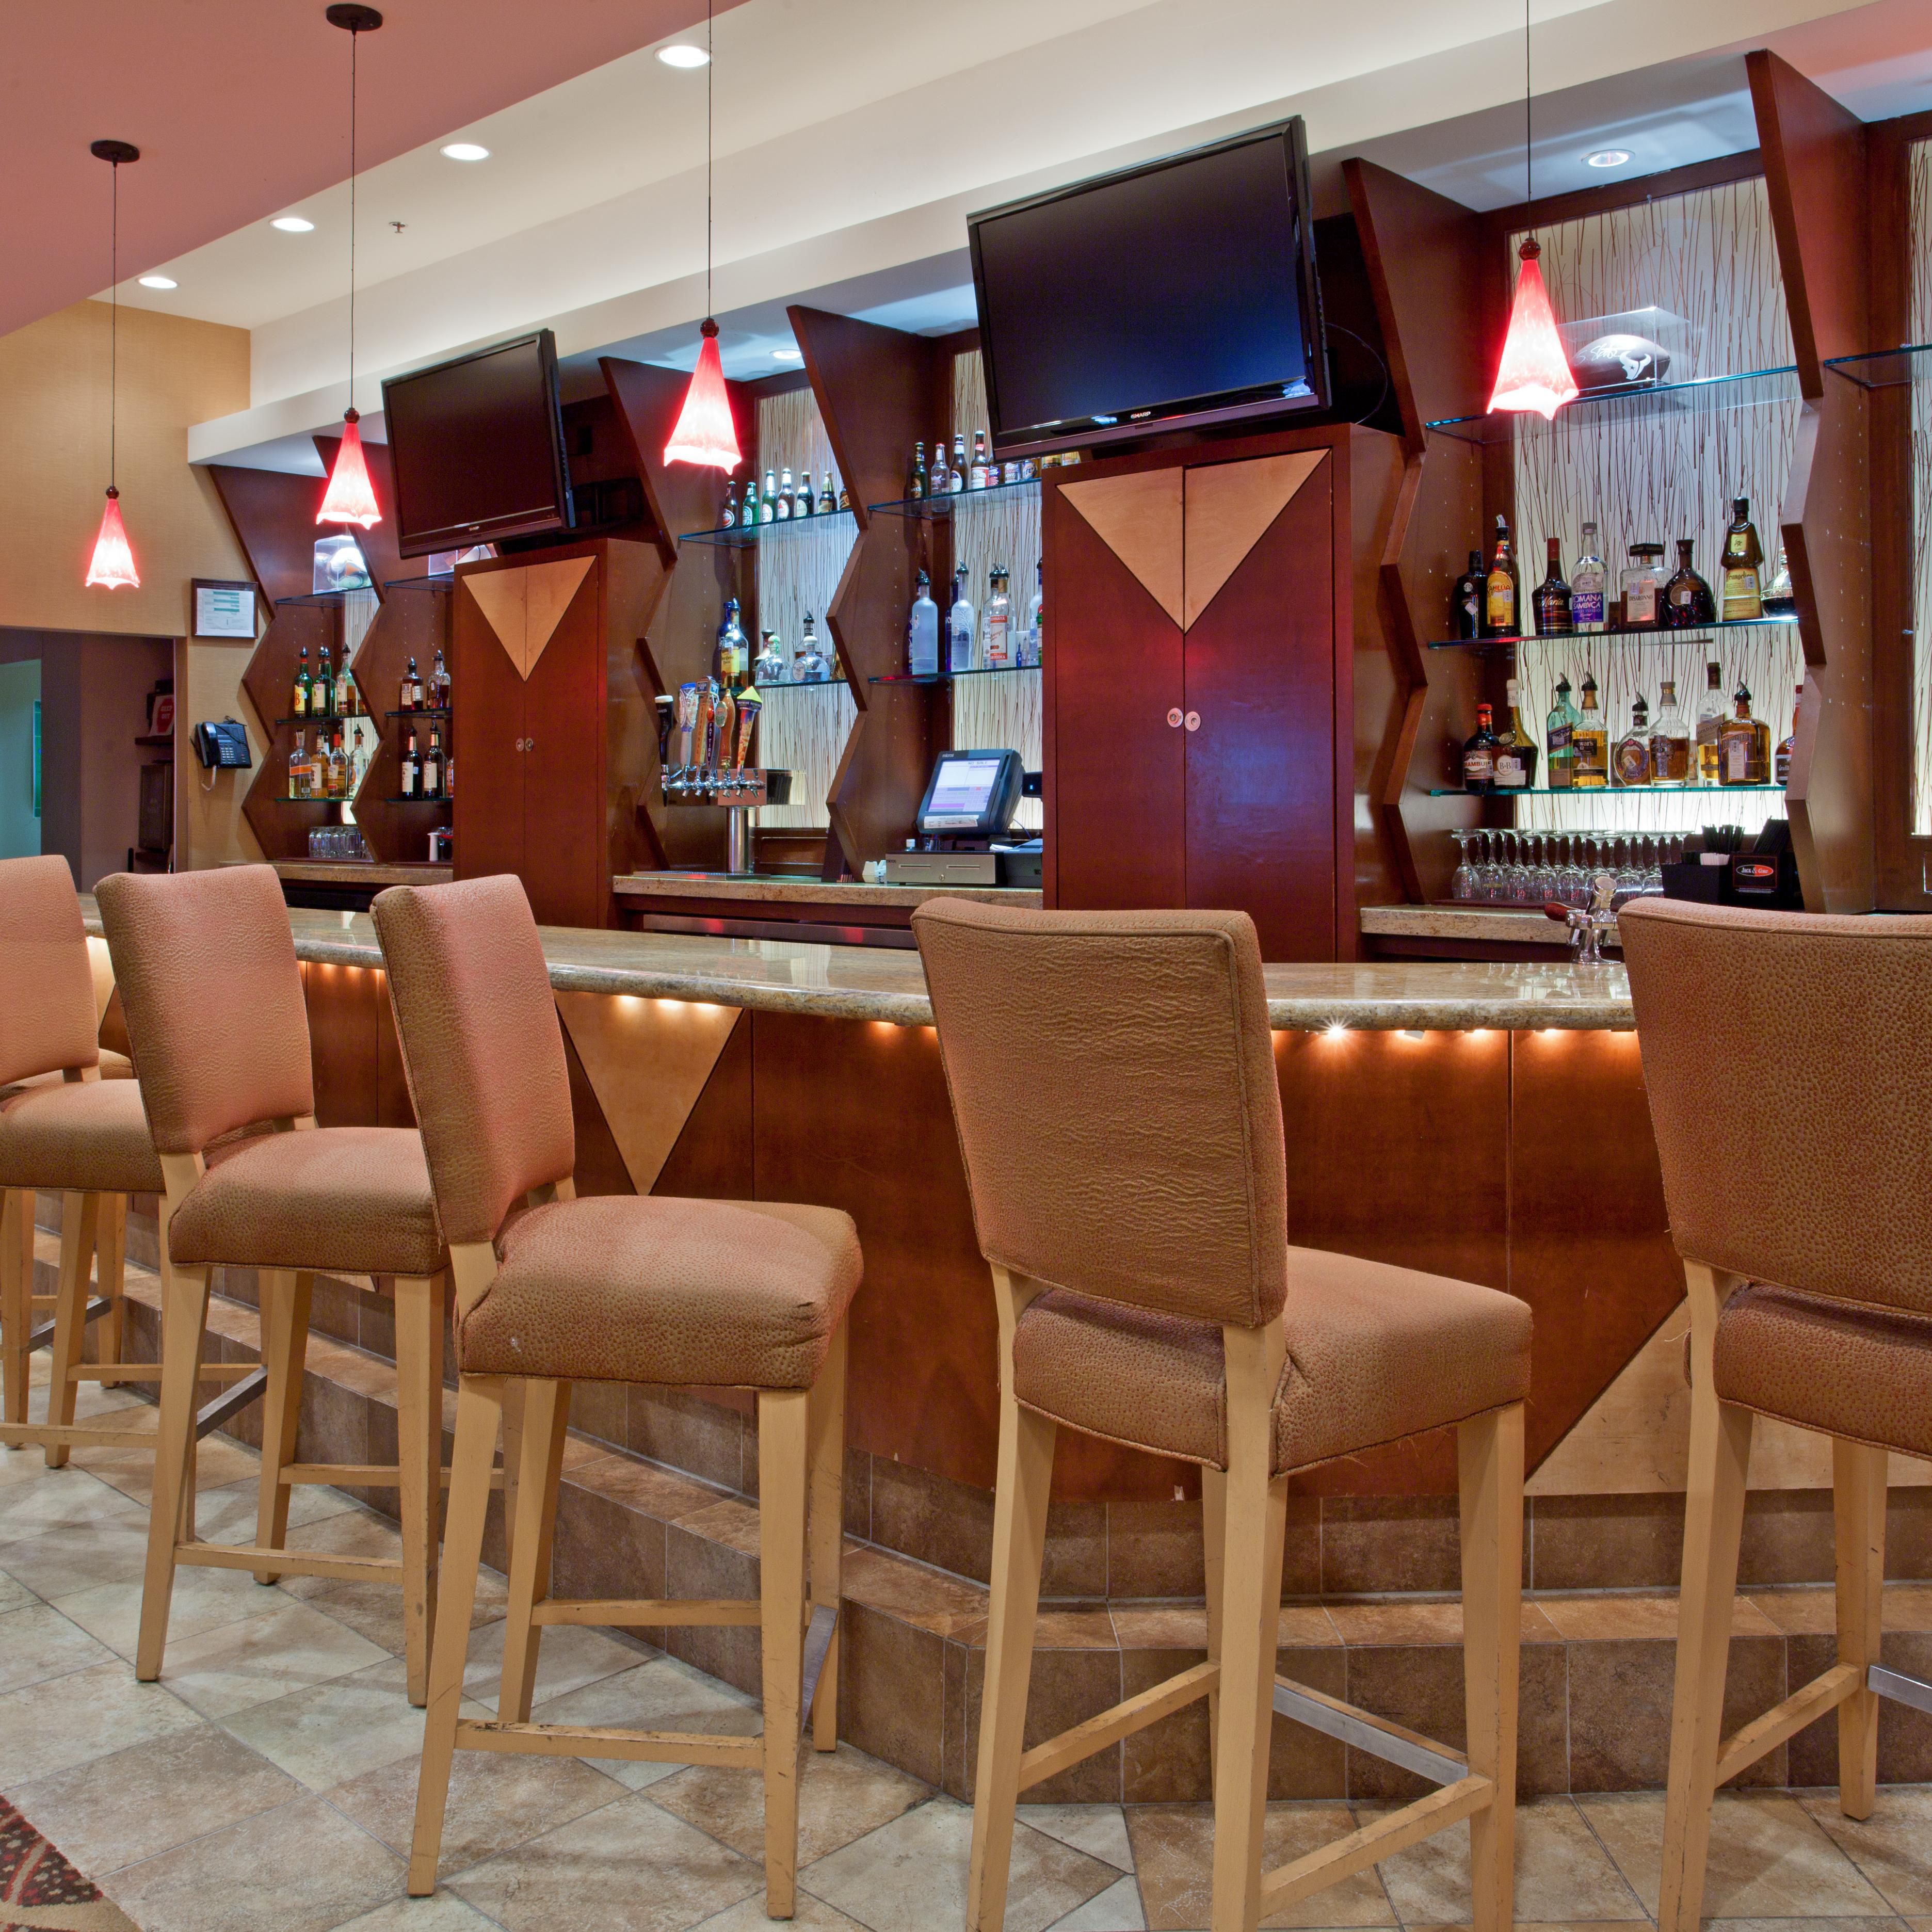 Our bar has an impressive variety of drinks for every palate.